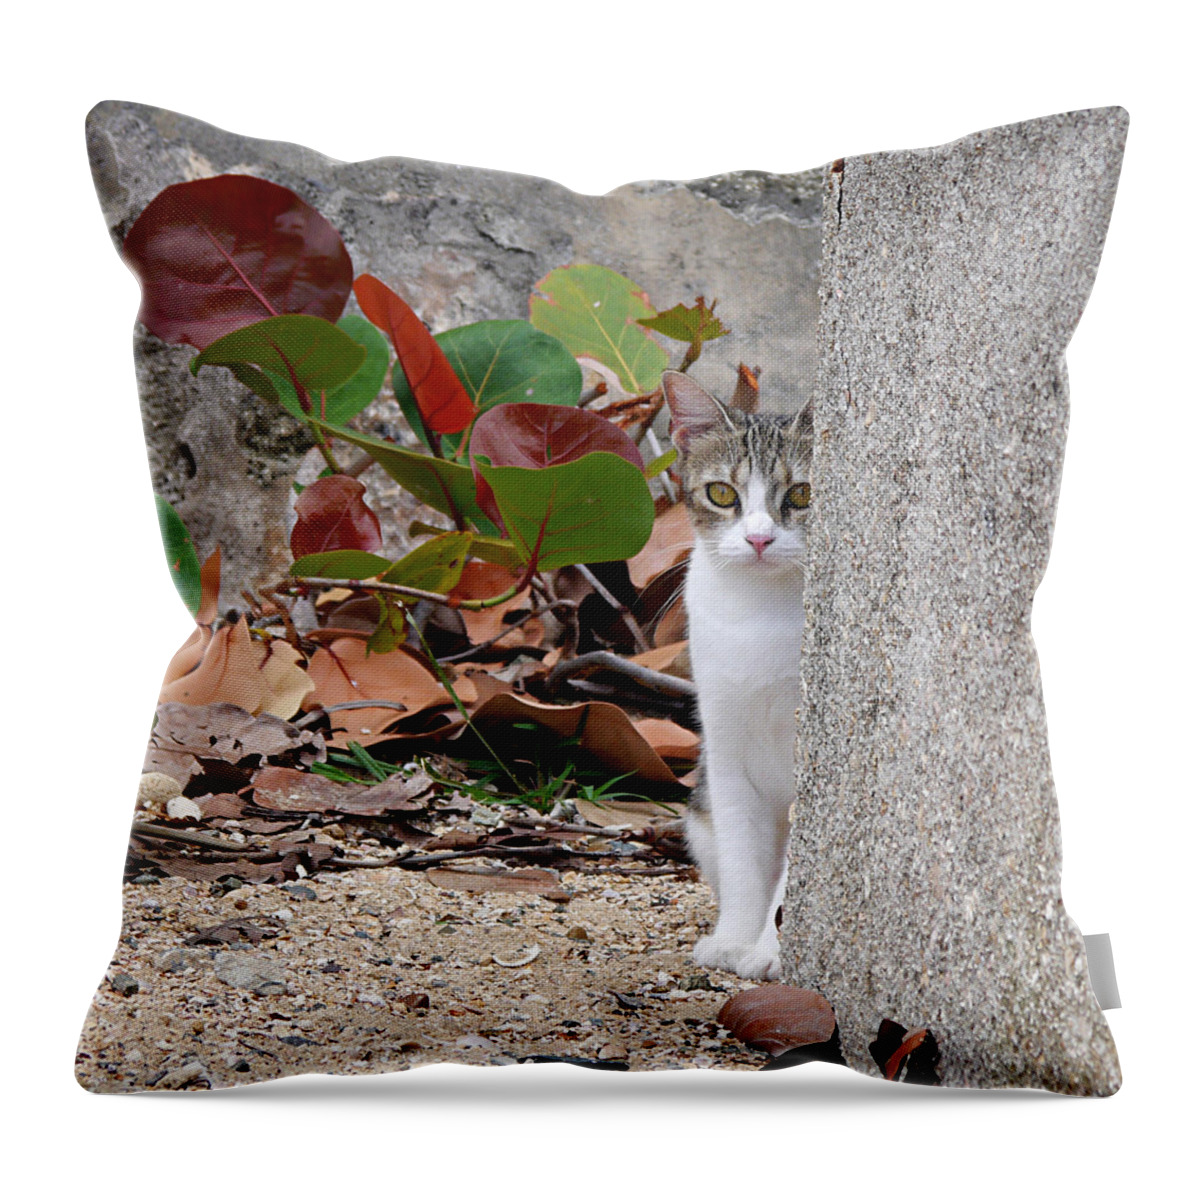 Ichard Reeve Throw Pillow featuring the photograph San Juan - Colonial Cat by Richard Reeve